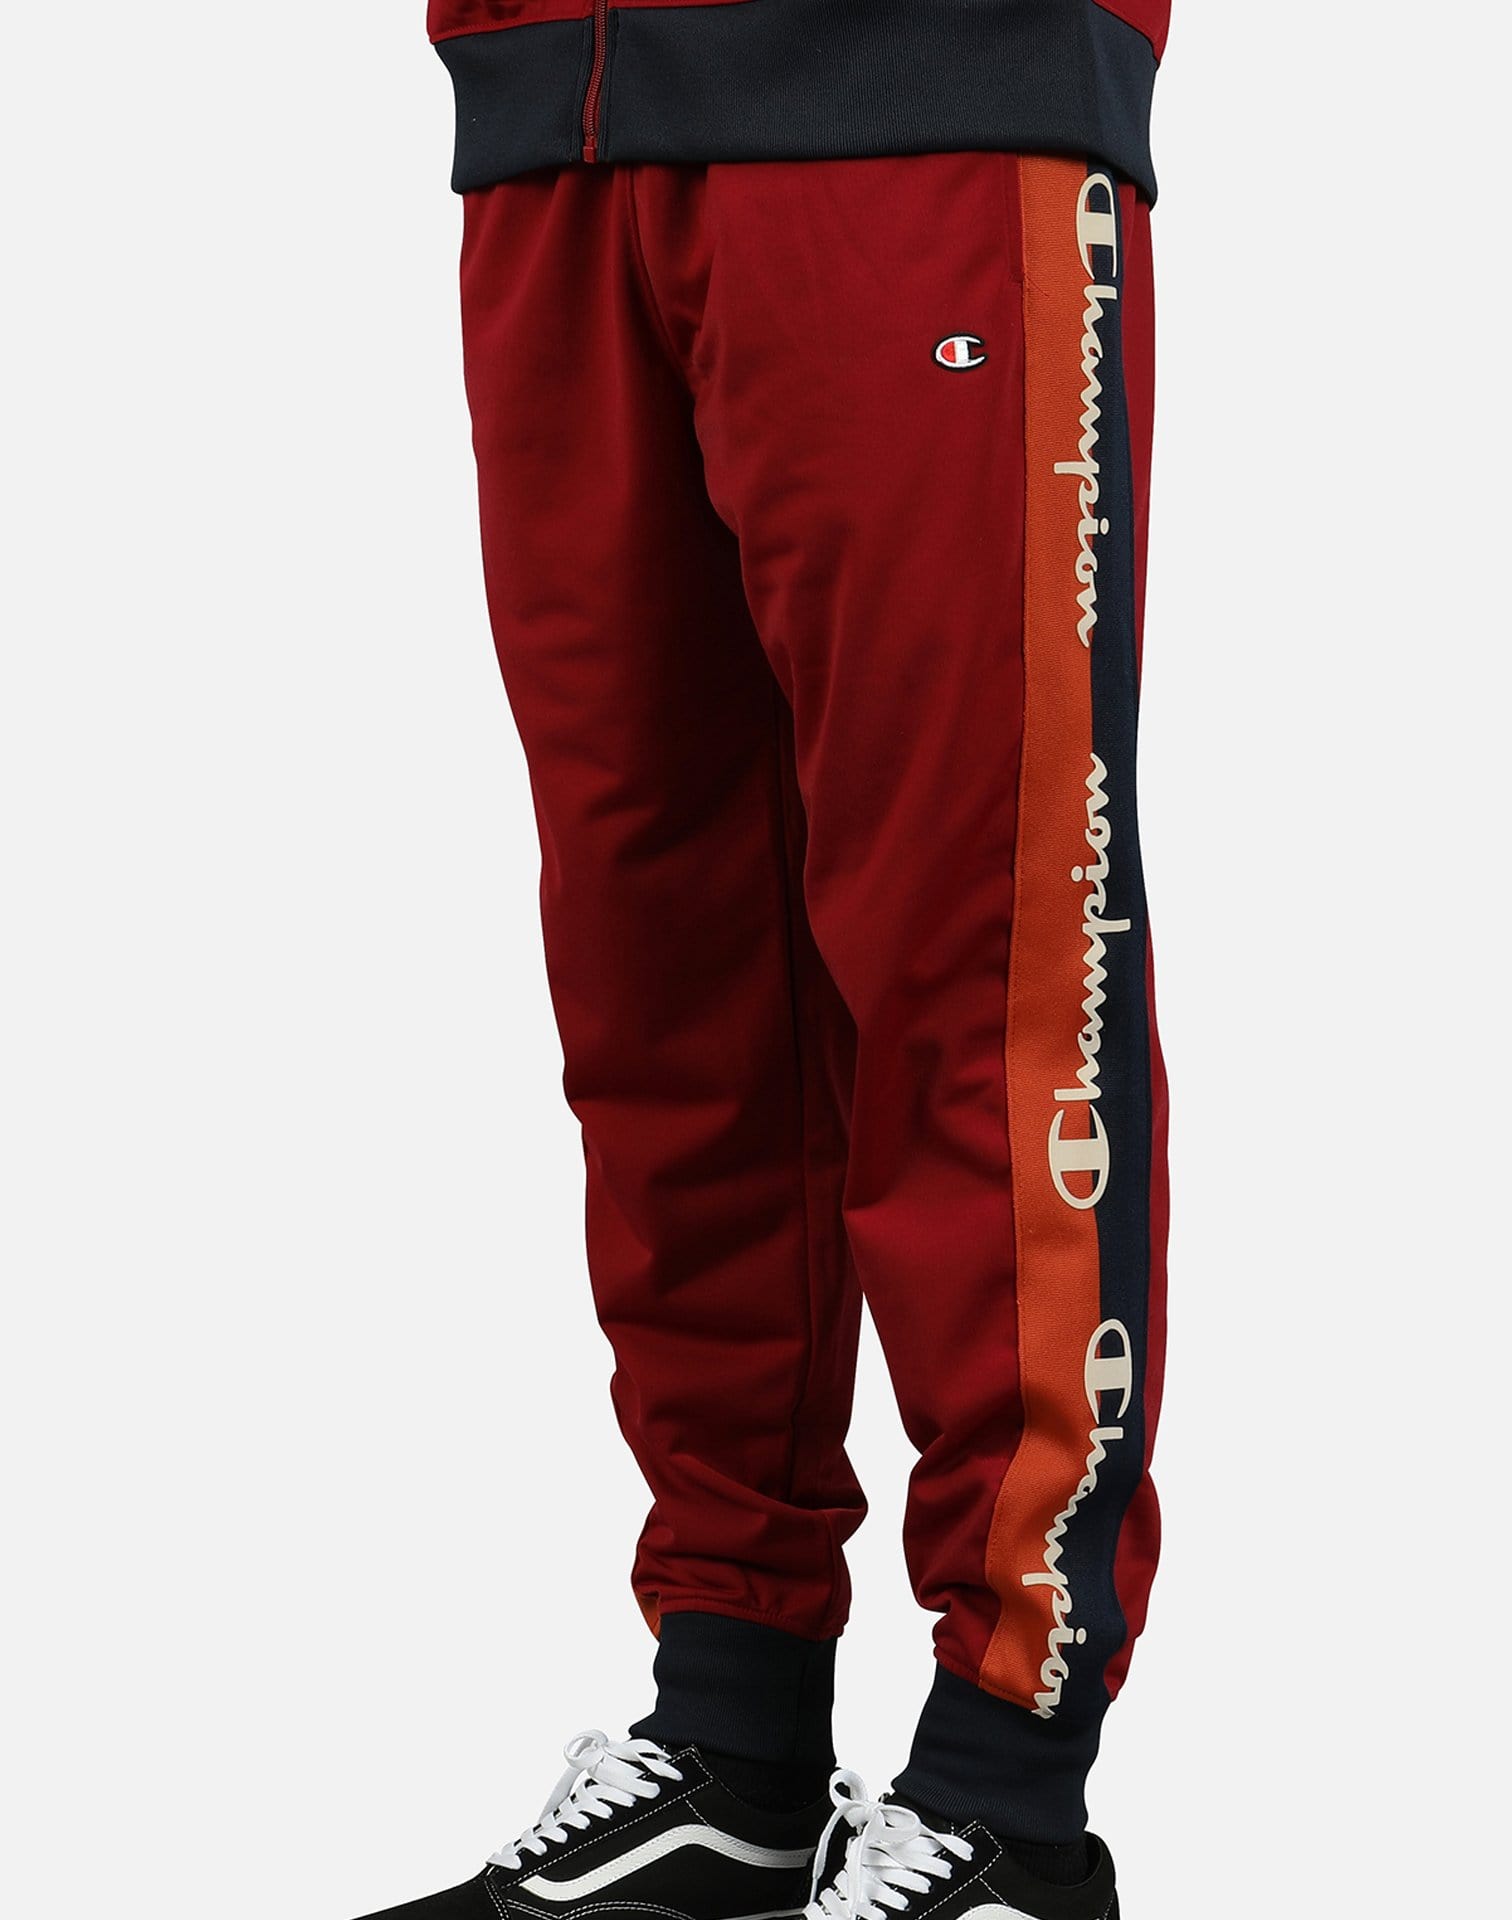 Pennenvriend ga sightseeing strottenhoofd Champion TRICOT TRACK PANTS – DTLR